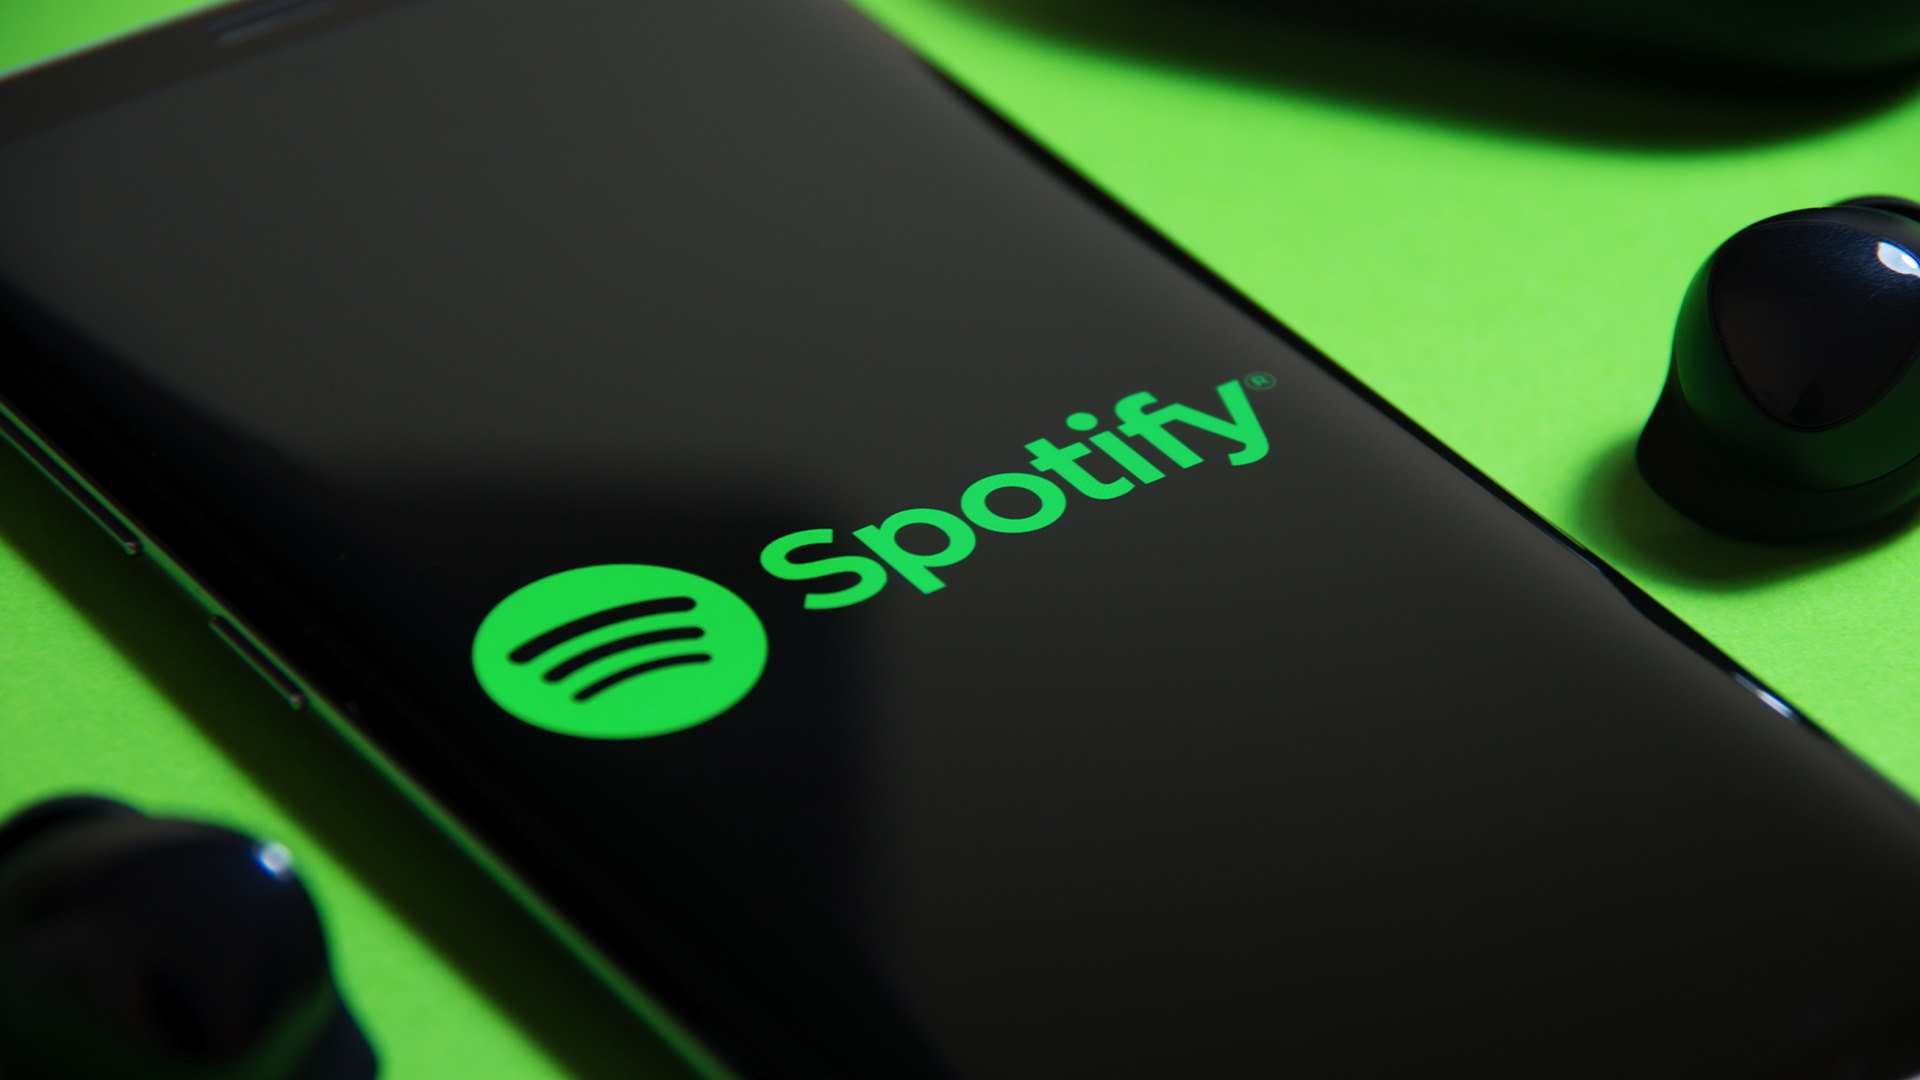 Spotify: Spotify's Android app, Totally free basic functions, 80 million tracks. 1920x1080 Full HD Background.